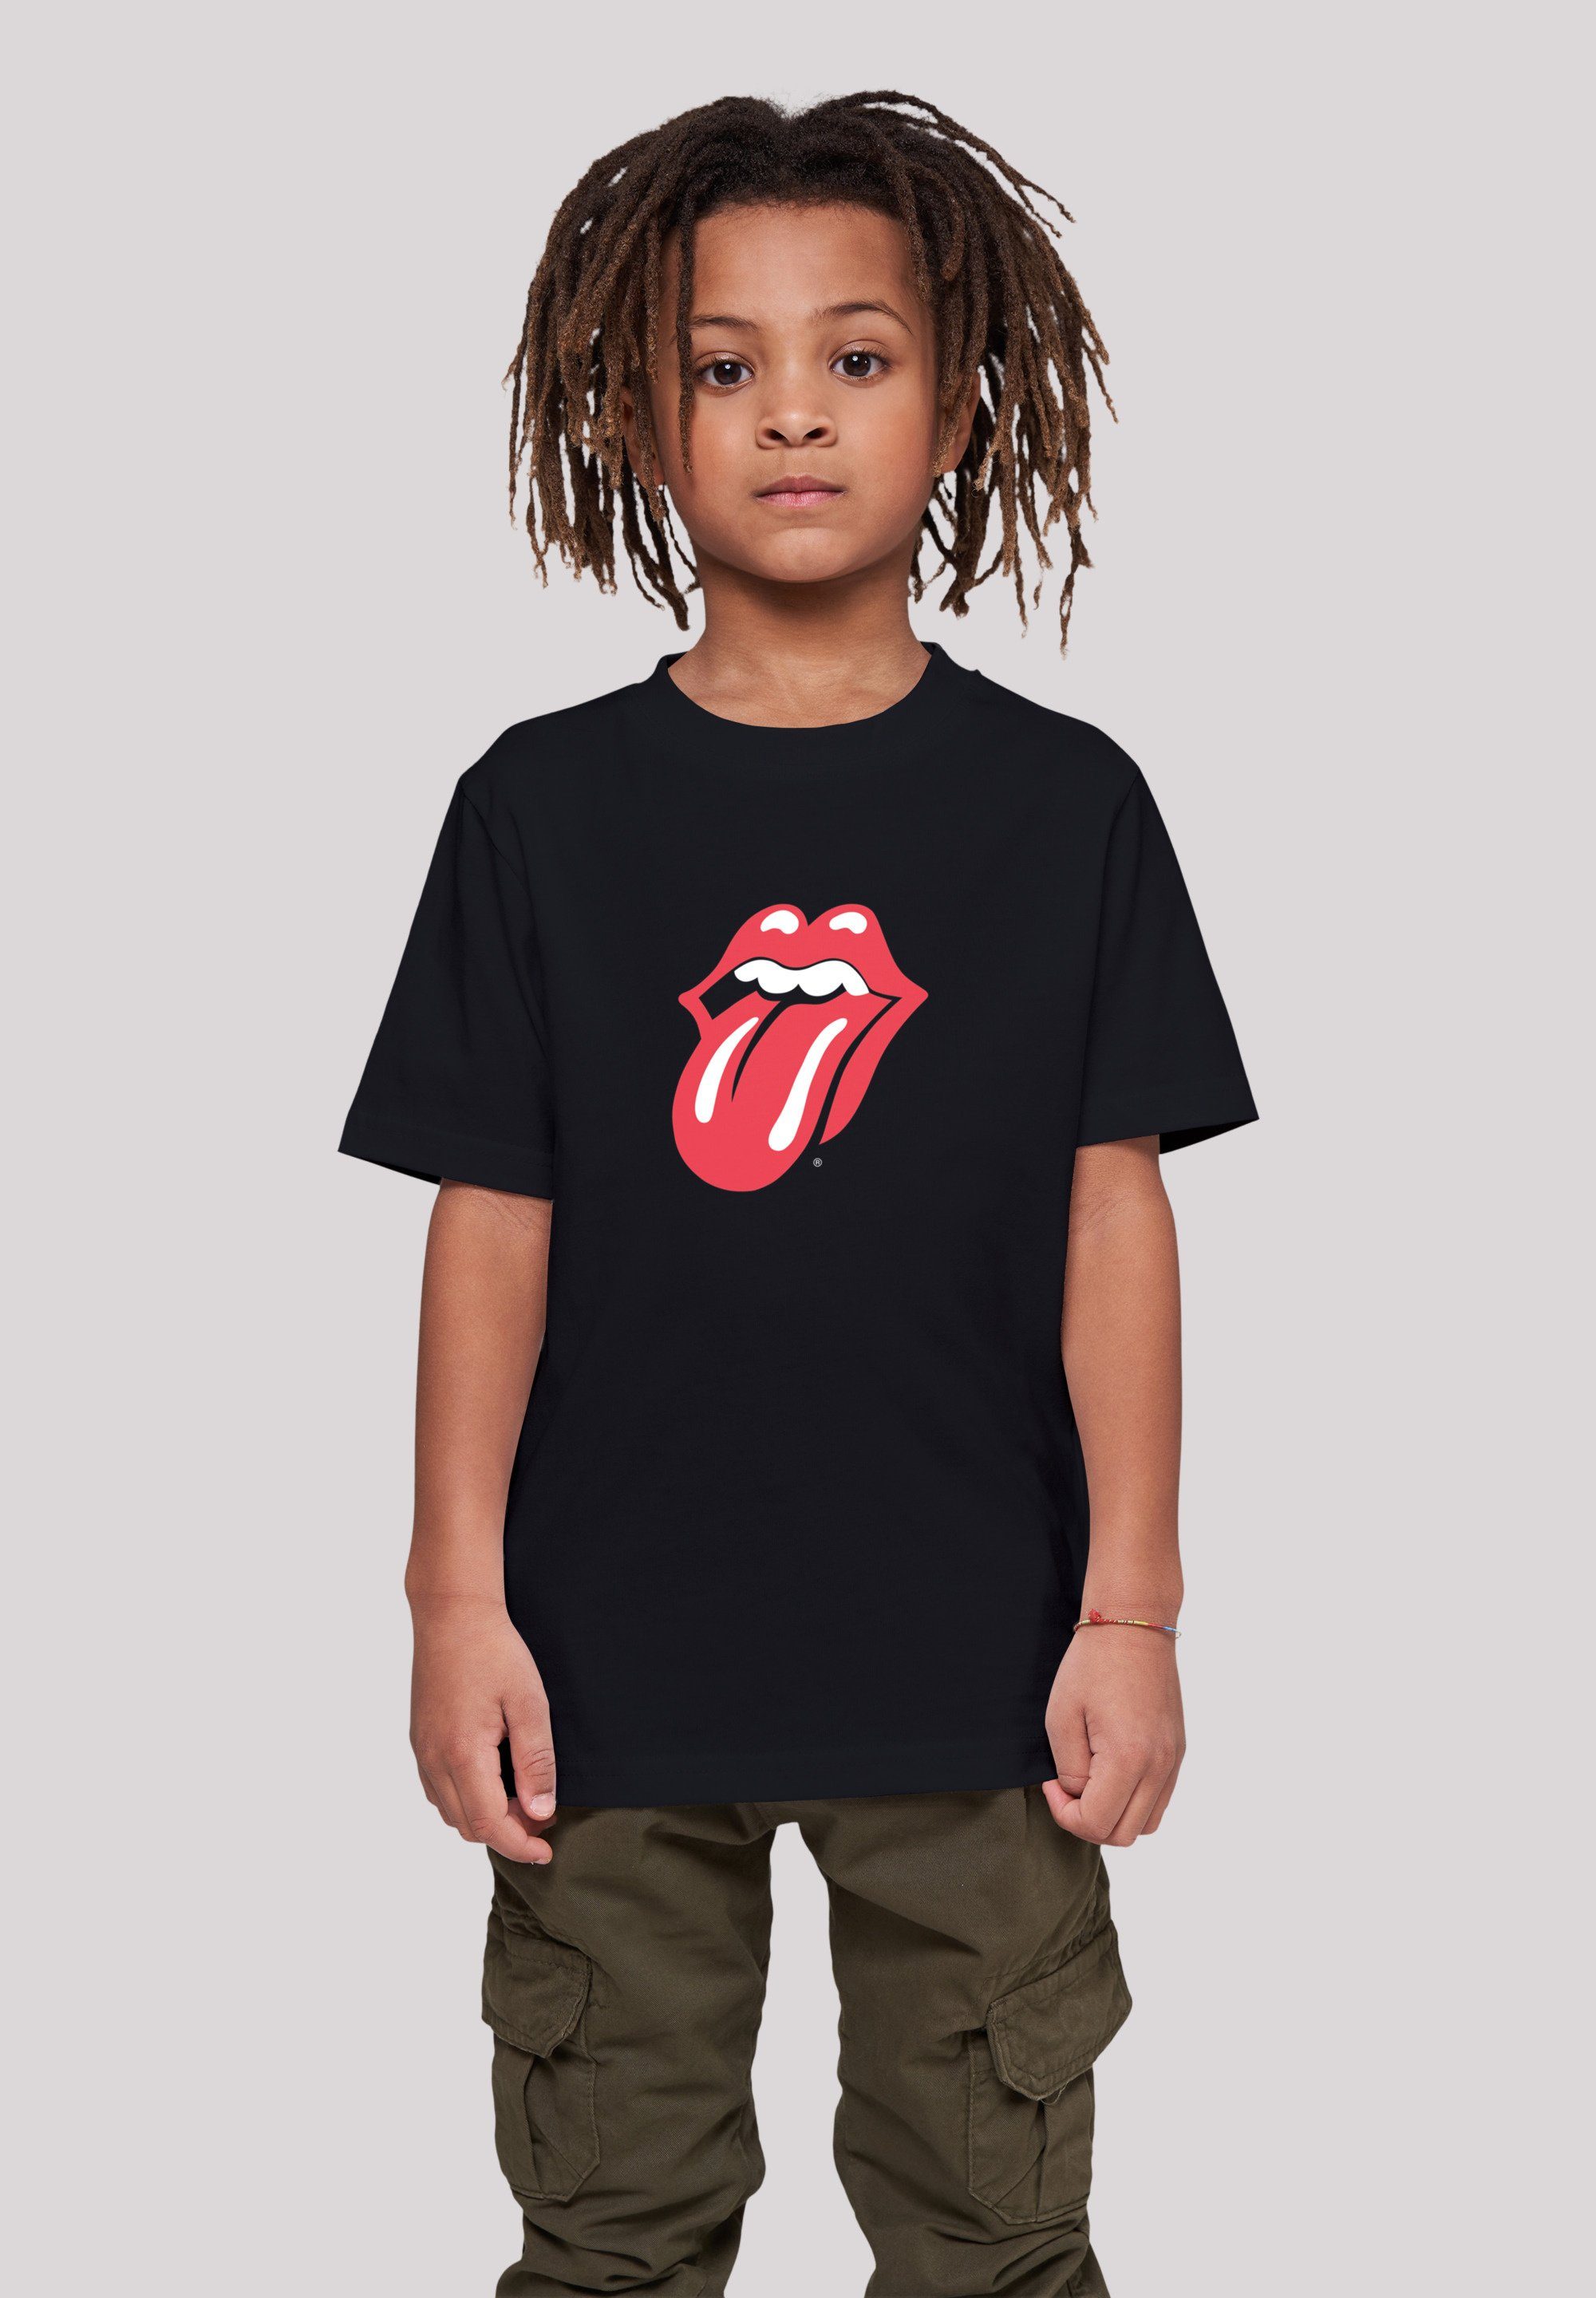 F4NT4STIC T-Shirt The Rolling Stones Zunge Rot Print schwarz